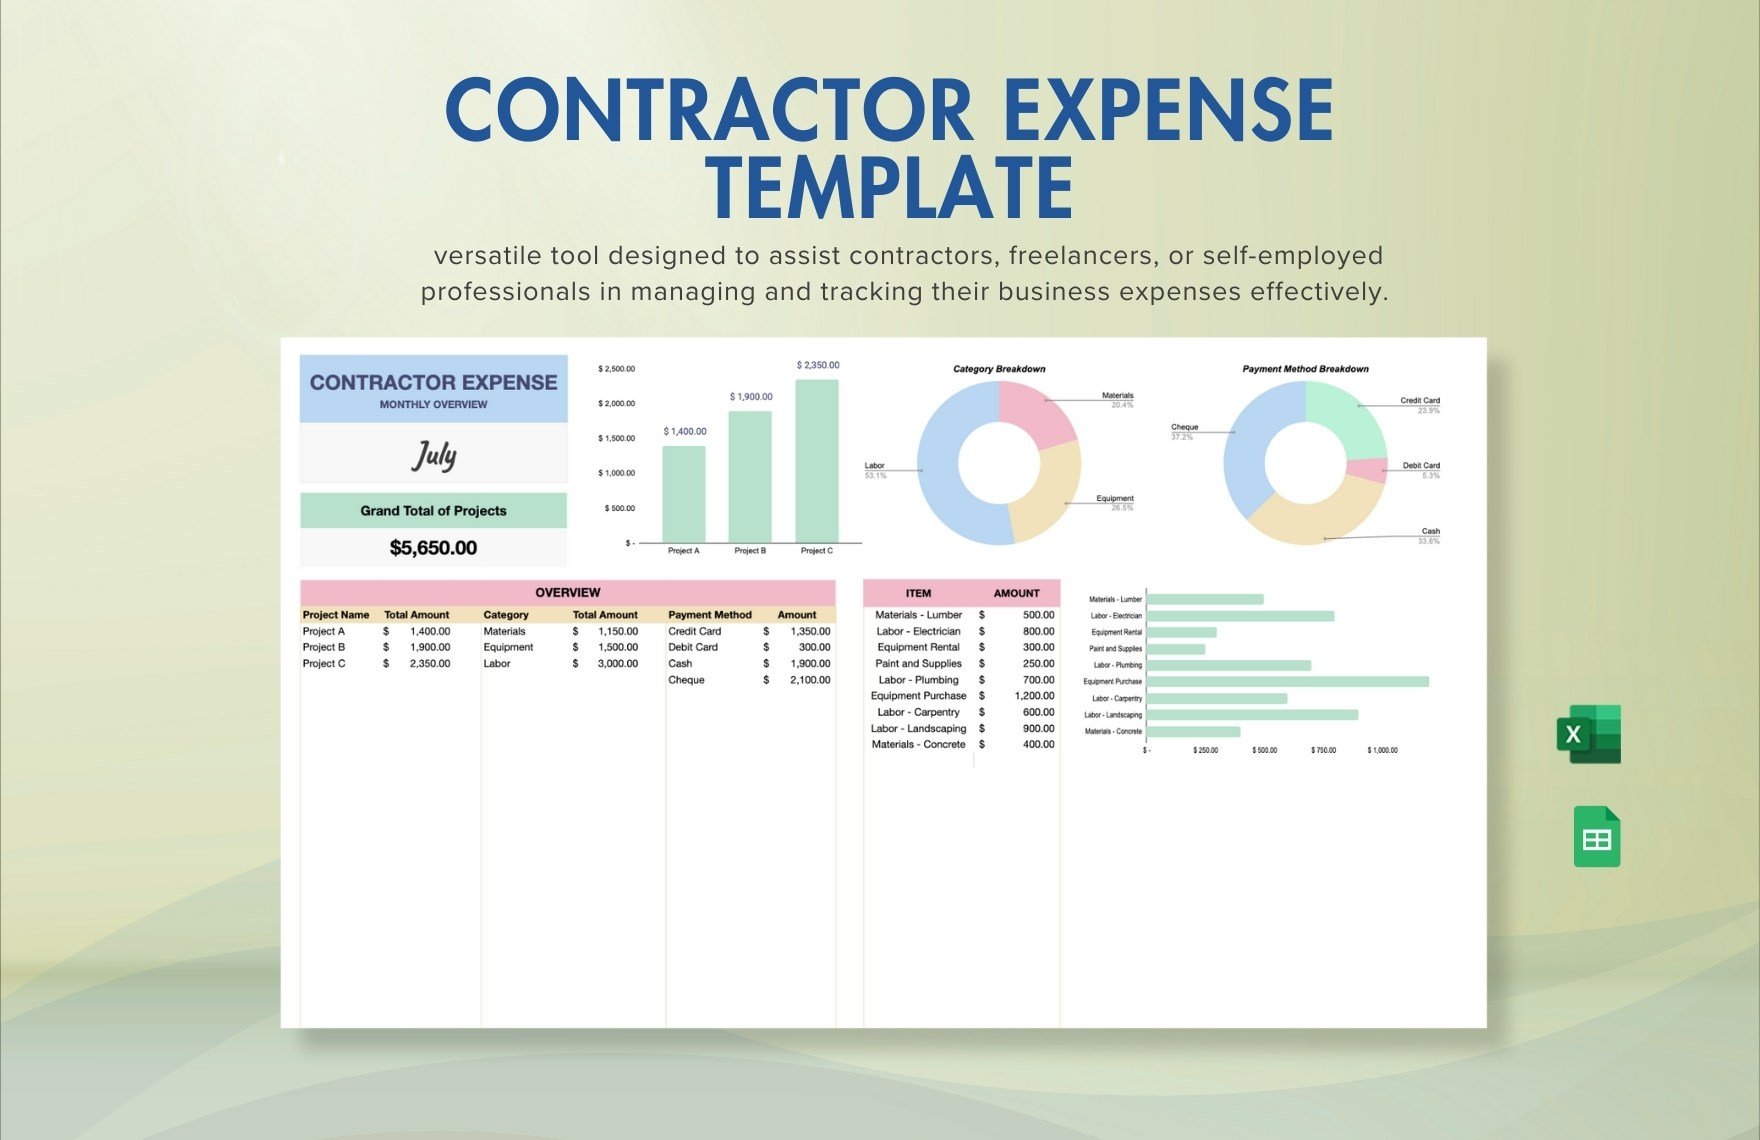 Contractor Expense Template in Excel, Google Sheets